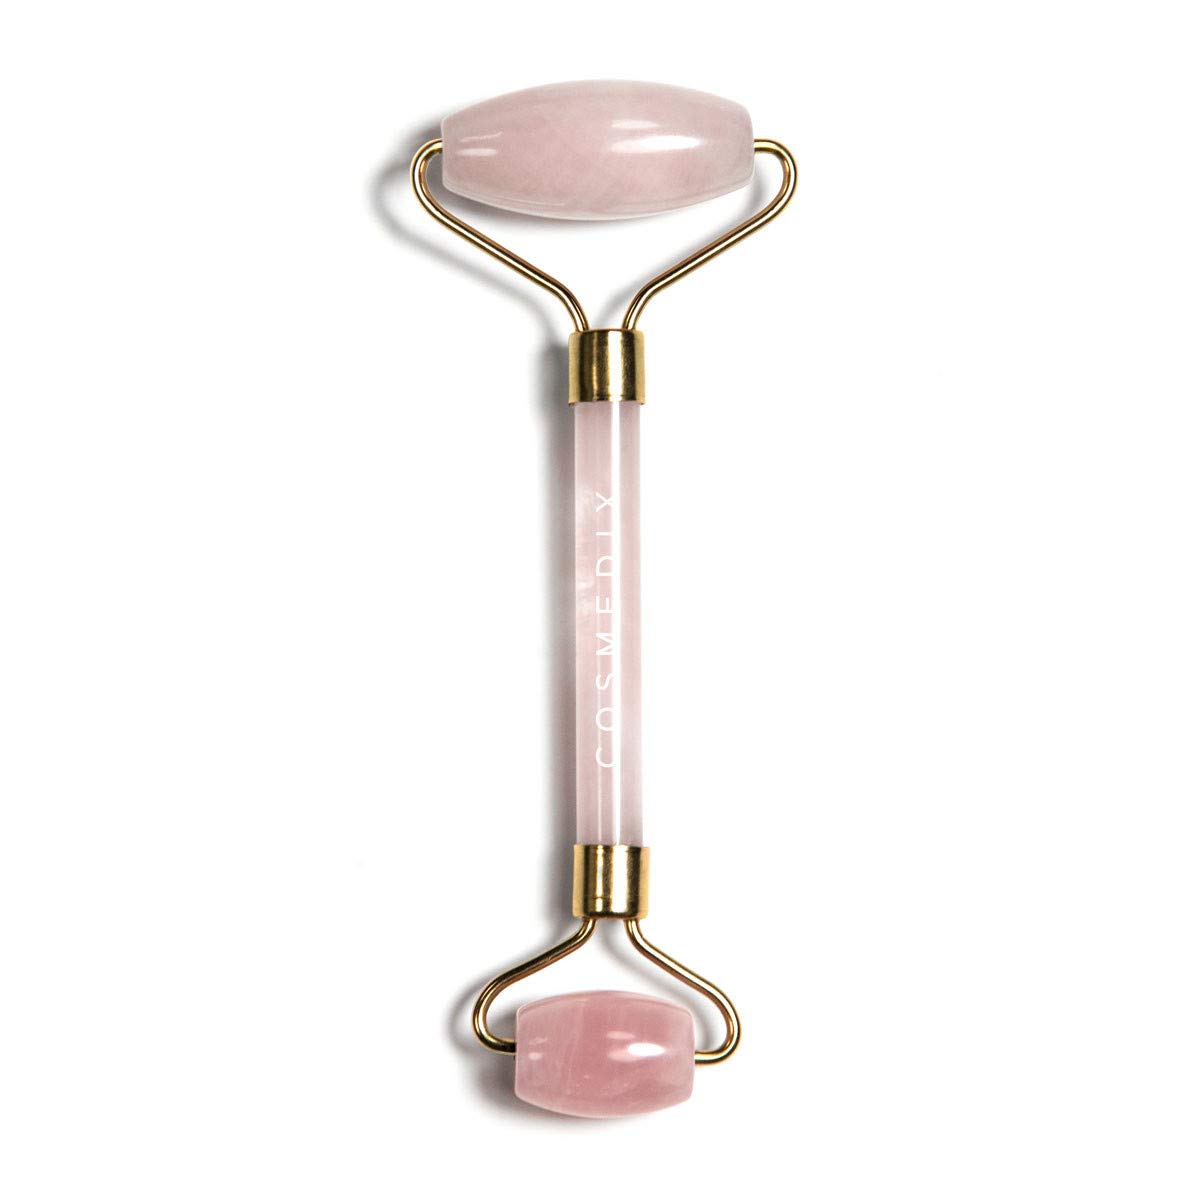 COSMEDIX Rose Quartz Crystal Face Roller for Wrinkles and Lifting - Eye Roller, Ice Roller for Face & Eye Puffiness Relief - Instant Face Lift - Beauty & Personal Care - Skin Care Tools